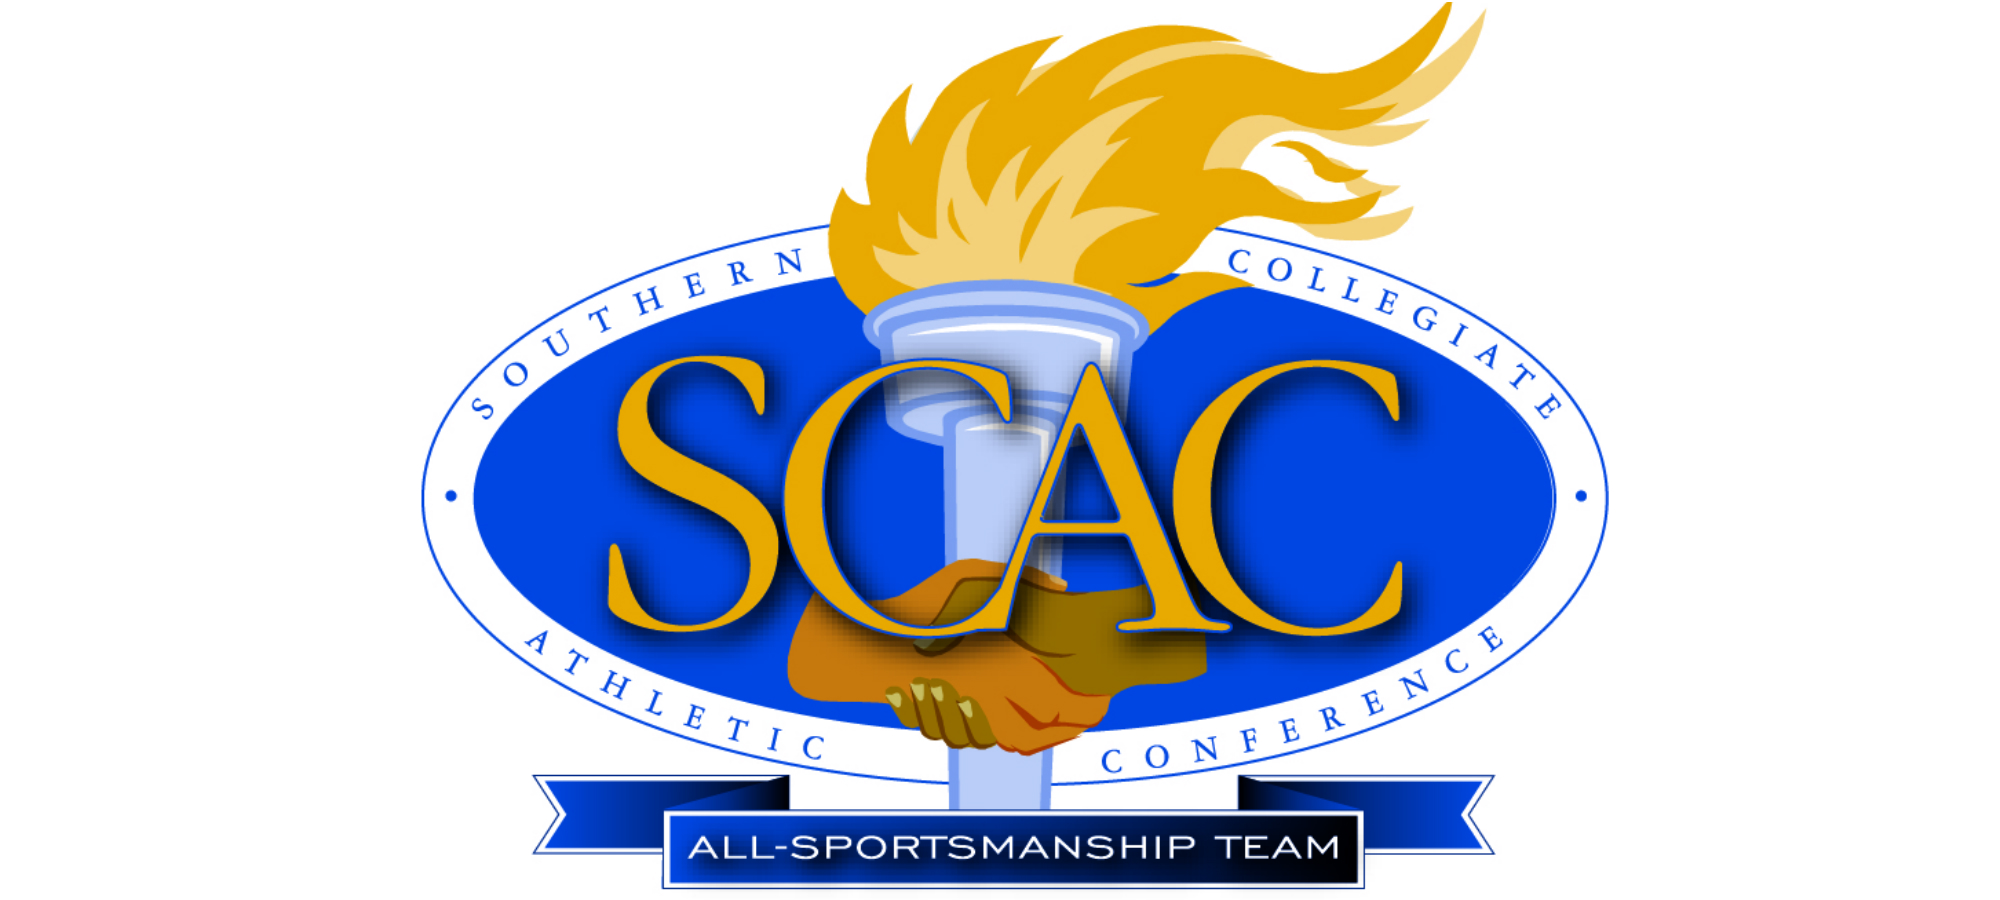 5 Players Named on 2016 SCAC All-Sportsmanship Team